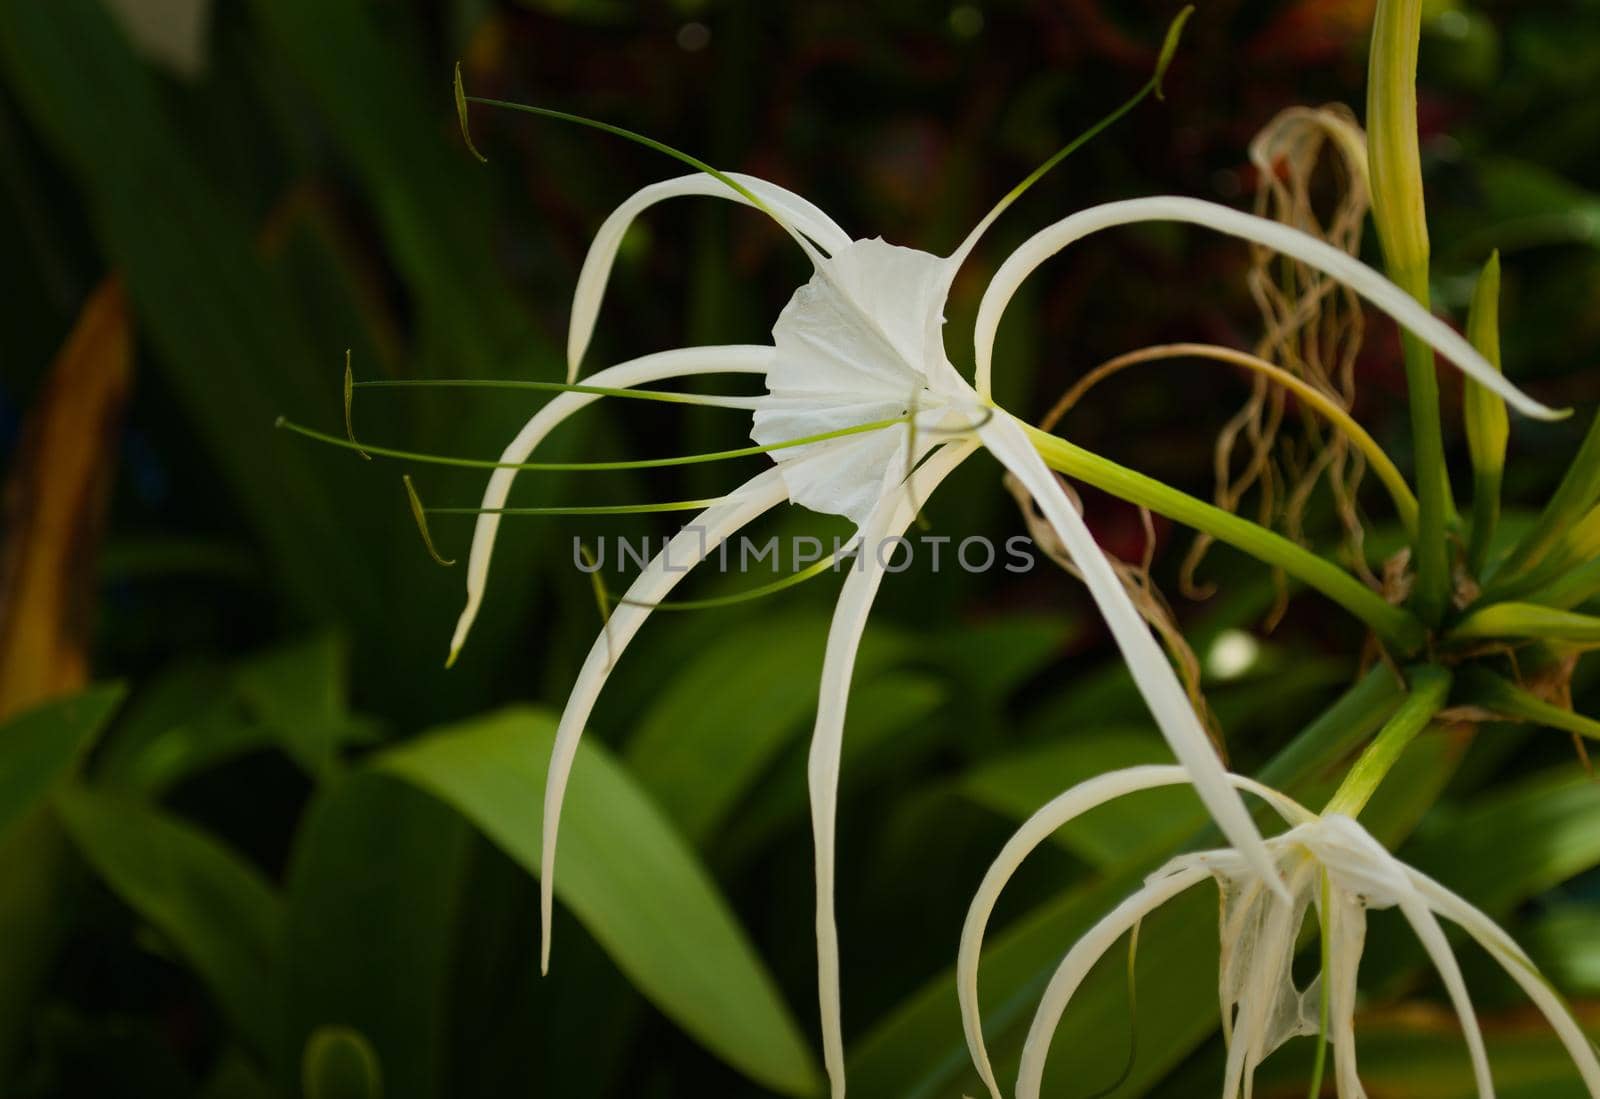 Caribbean spider lily (Hymenocallis caribaea), close up of a specimen in a garden in Thailand. by hernan_hyper